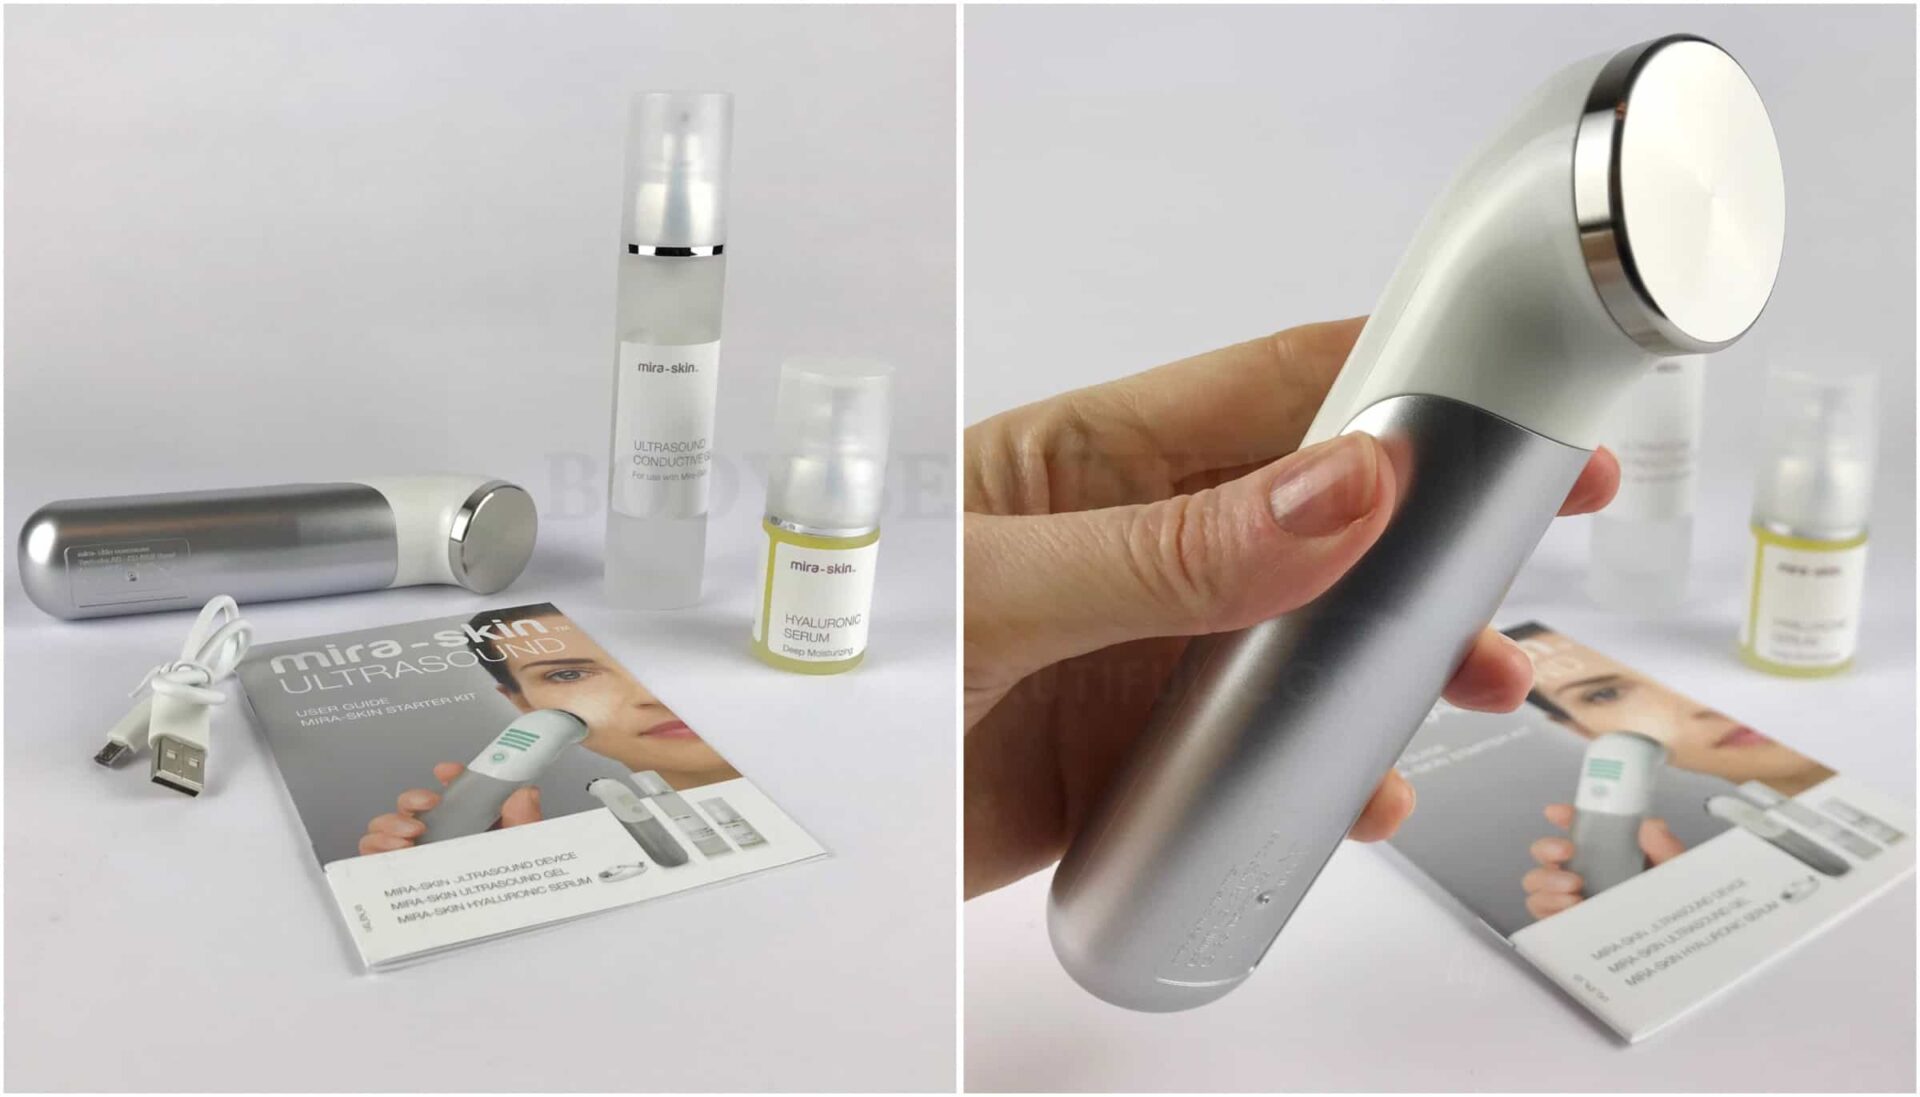 Tried & tested Mira-skin ultrasound & Hyaluronic Acid facial review by WeAreBodyBeautiful.com